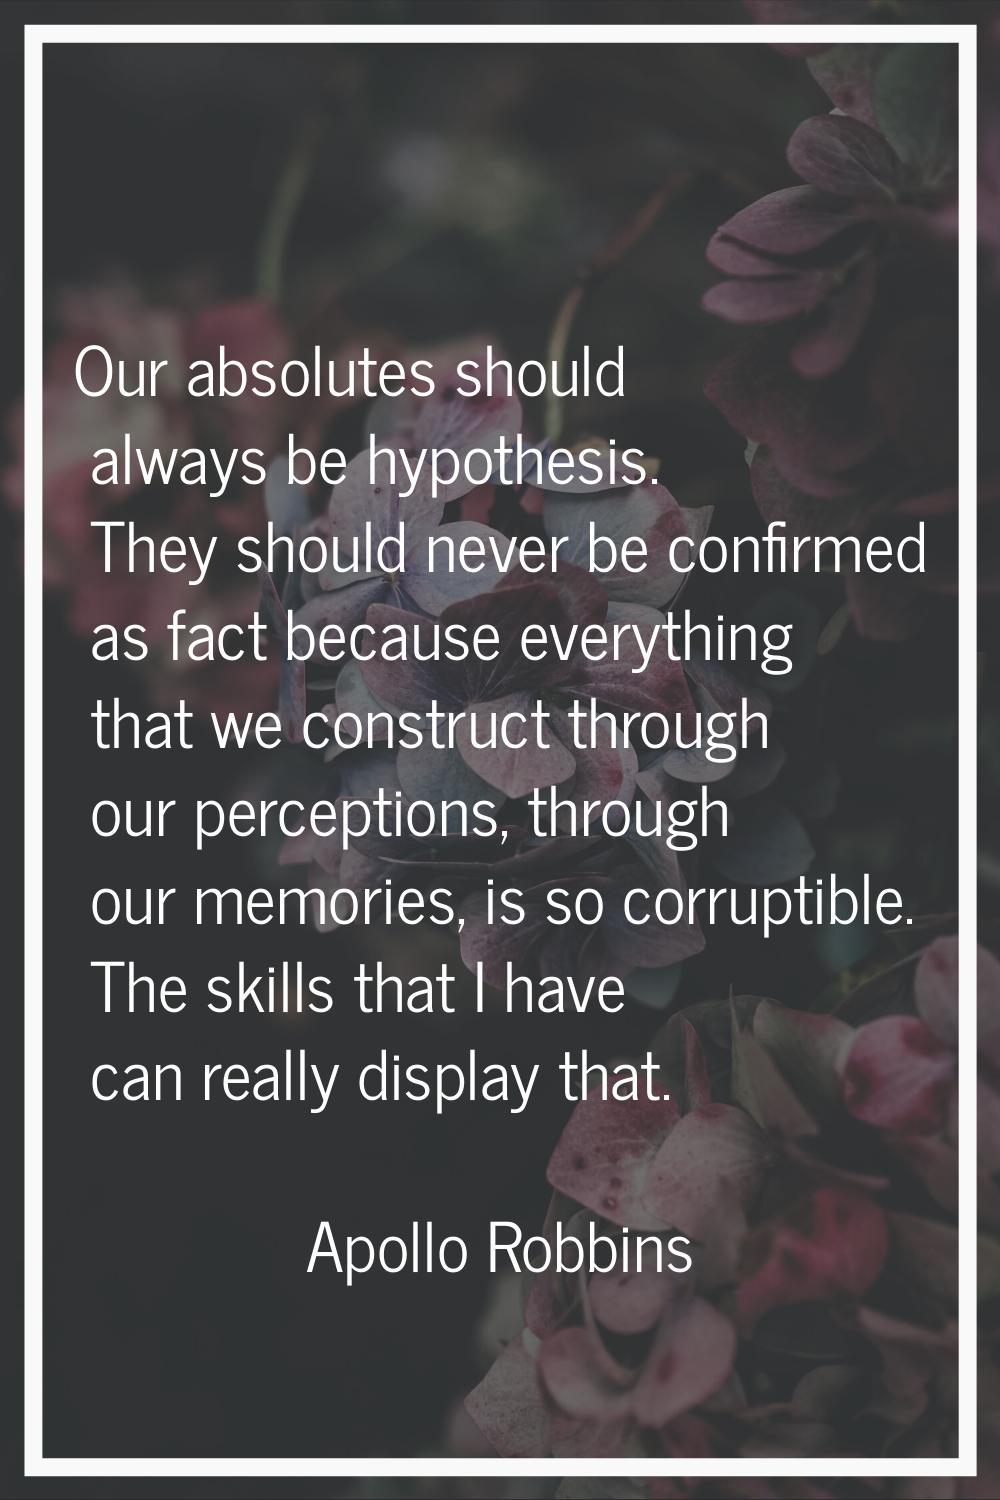 Our absolutes should always be hypothesis. They should never be confirmed as fact because everythin